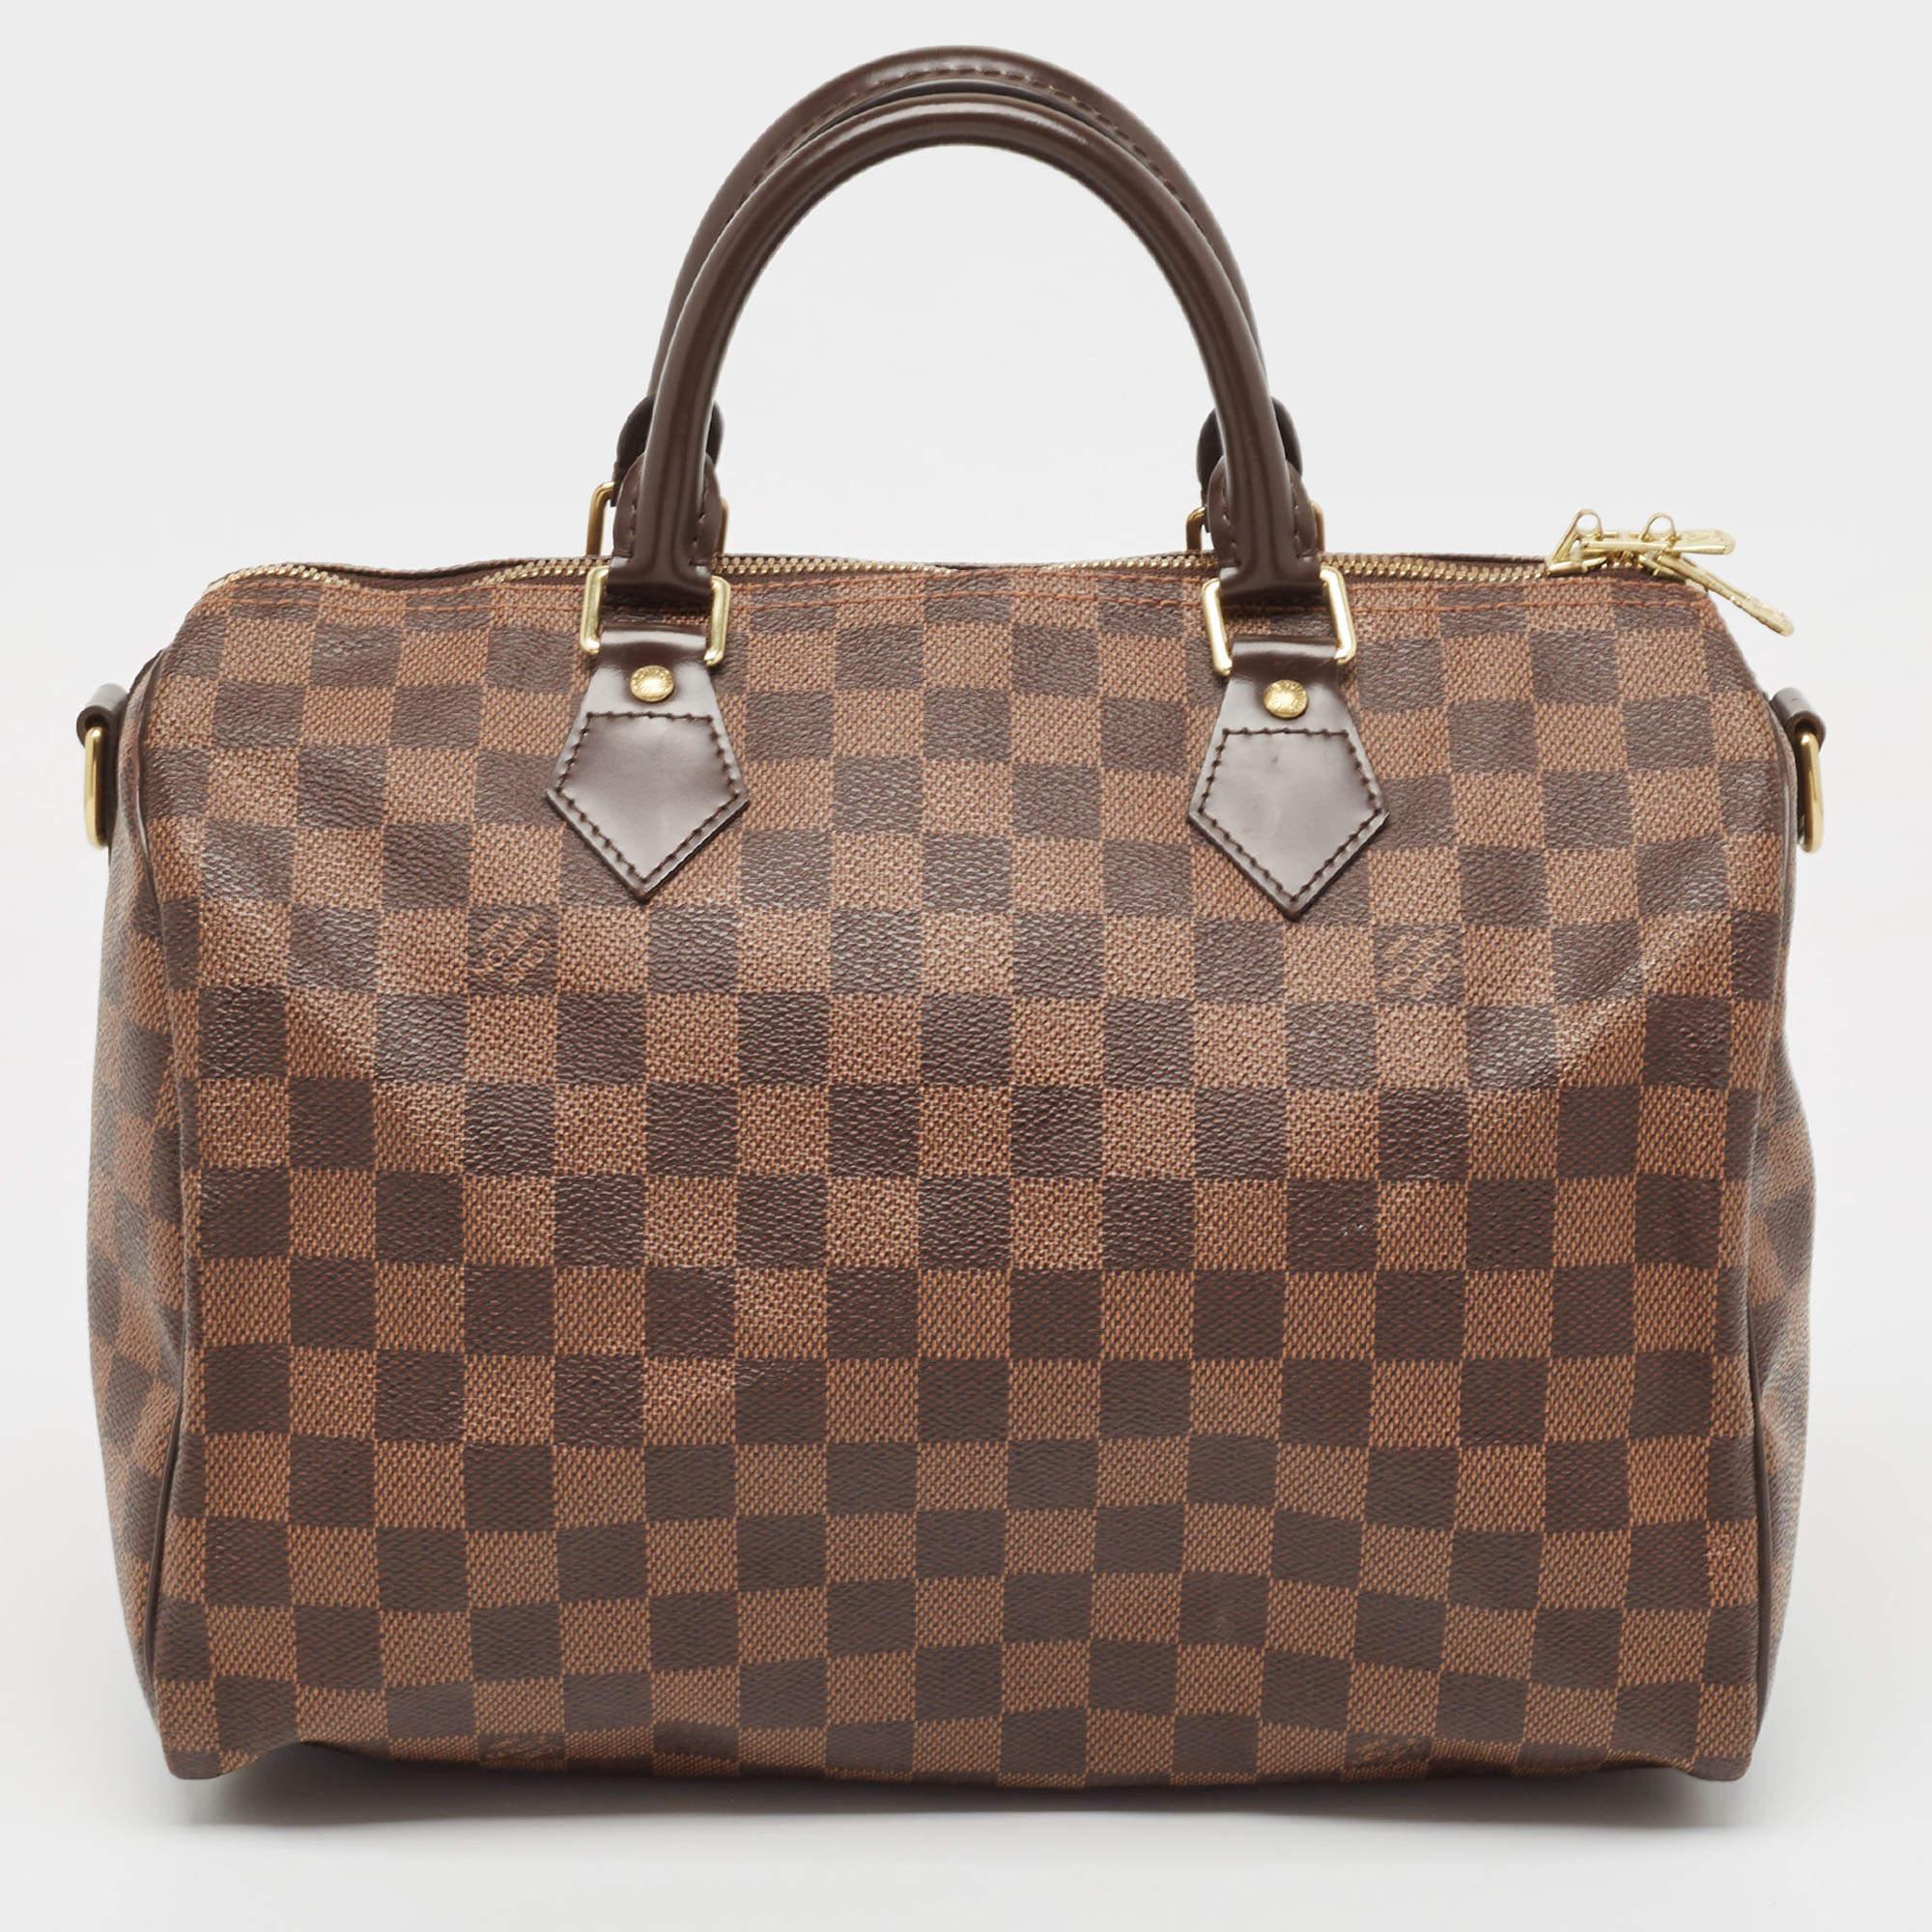 Louis Vuitton's handbags are popular owing to their high style and functionality. This bag, like all their designs, is durable and stylish. Exuding a fine finish, the bag is designed to give a luxurious experience. The interior has enough space to